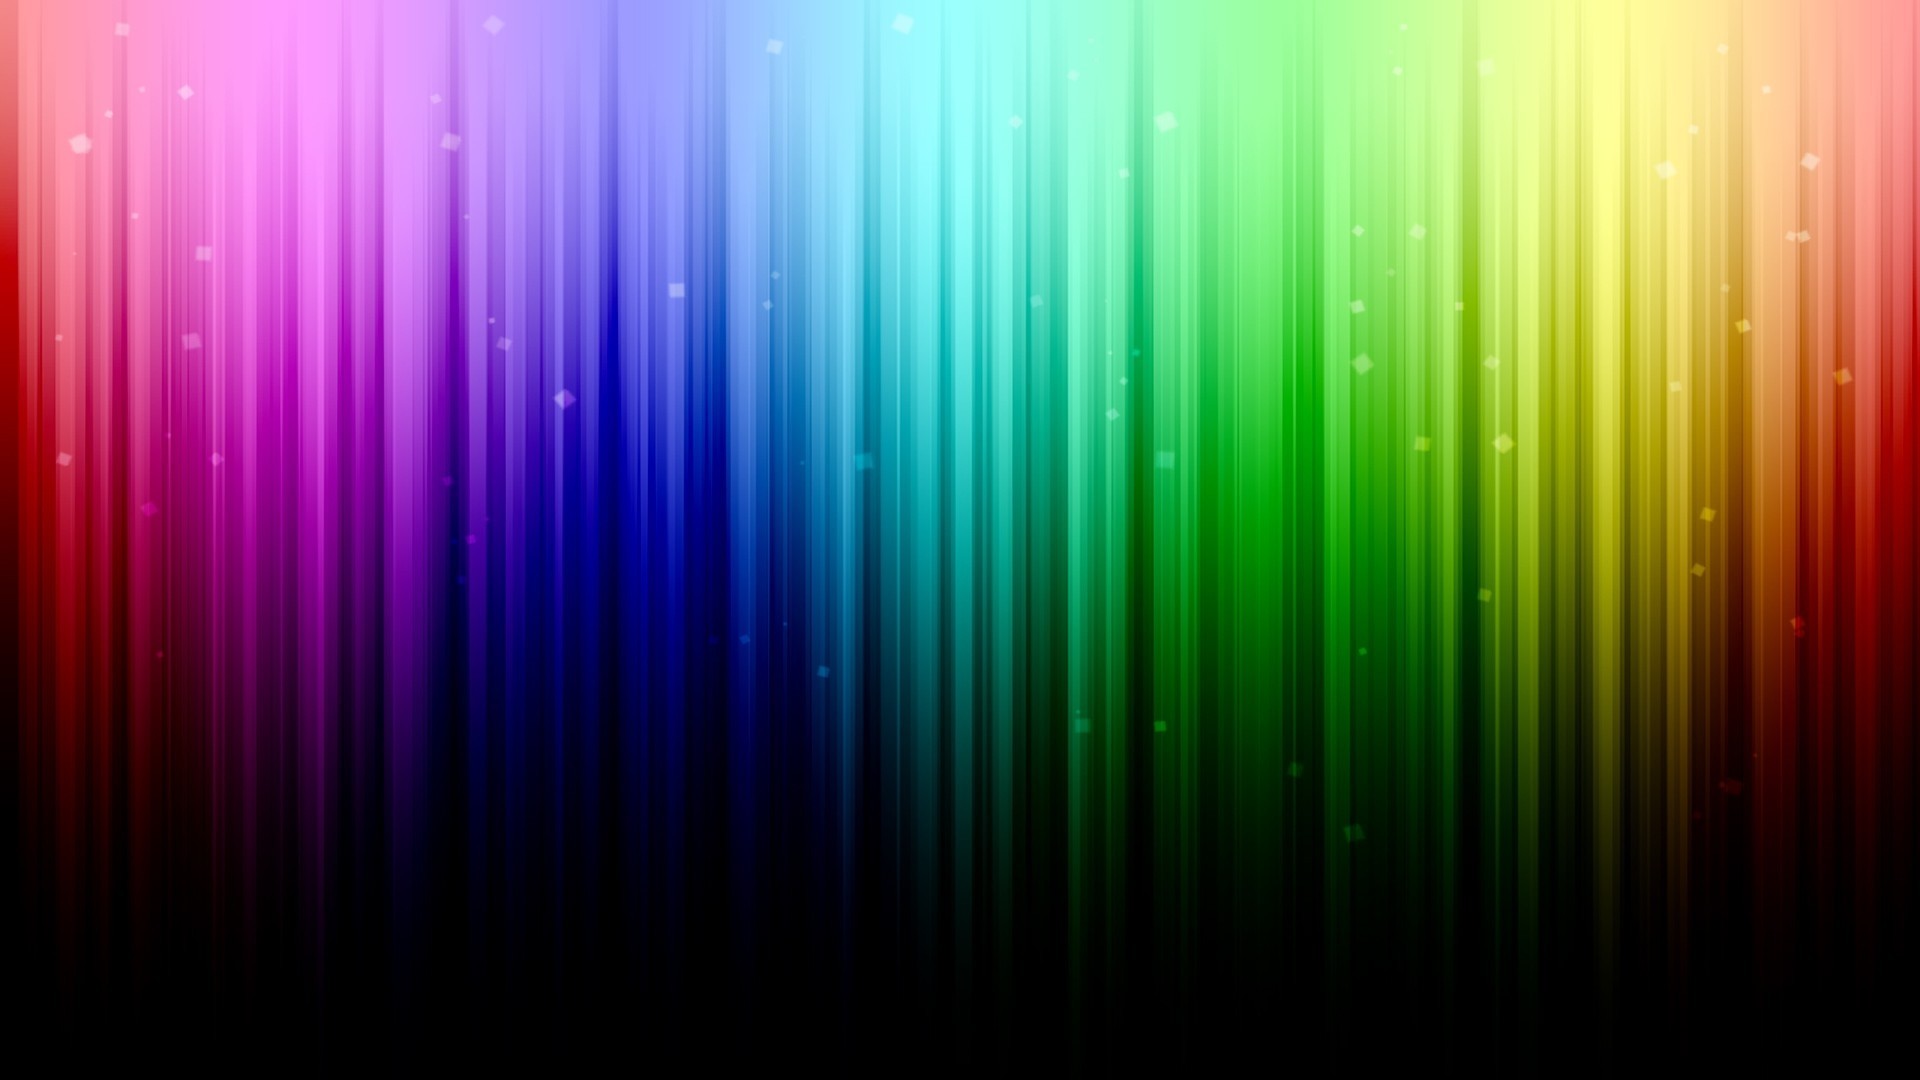 1920x1080 1920x1200 Bright Colors Wallpaper For Desktop, HD Wallpapers For Free ÃÂ»  M.F. Backgrounds